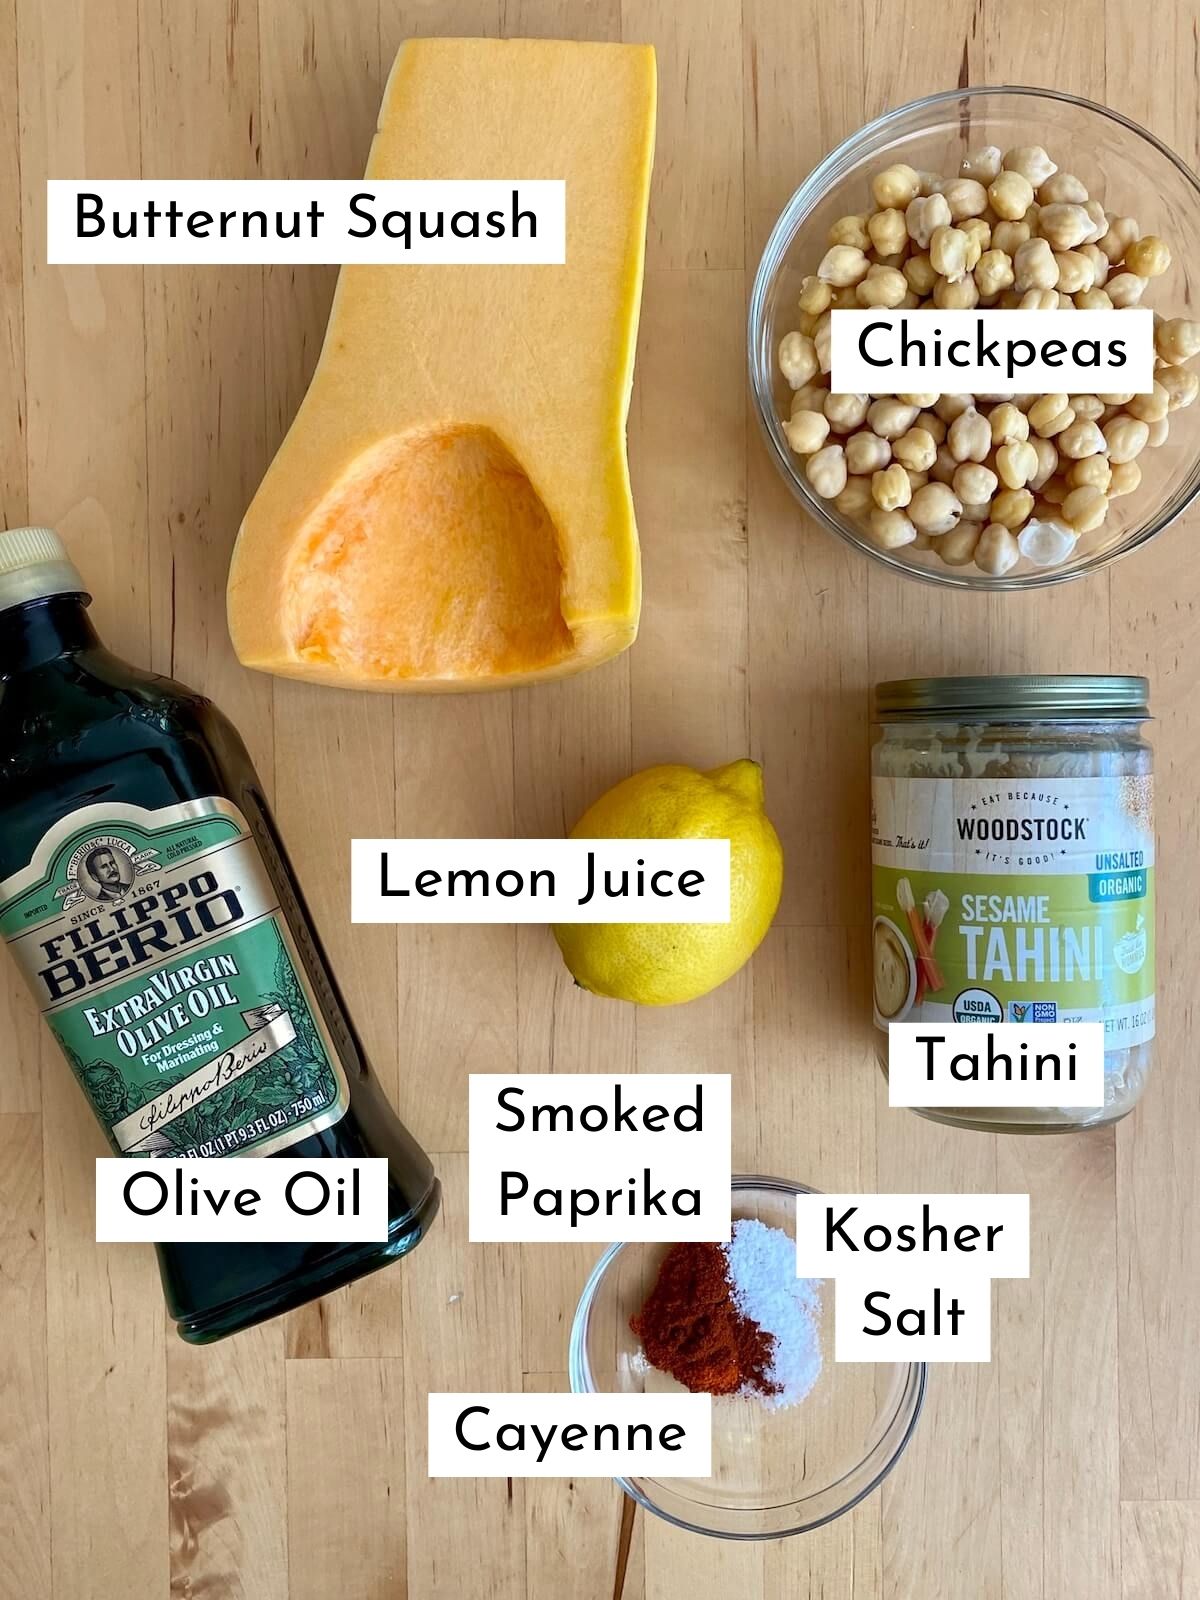 The ingredients to make butternut squash hummus on a wooden countertop. Each ingredient is labeled with text describing what it is. The ingredients include butternut squash, chickpeas, olive oil, lemon juice, tahini, smoked paprika, kosher salt, and cayenne.